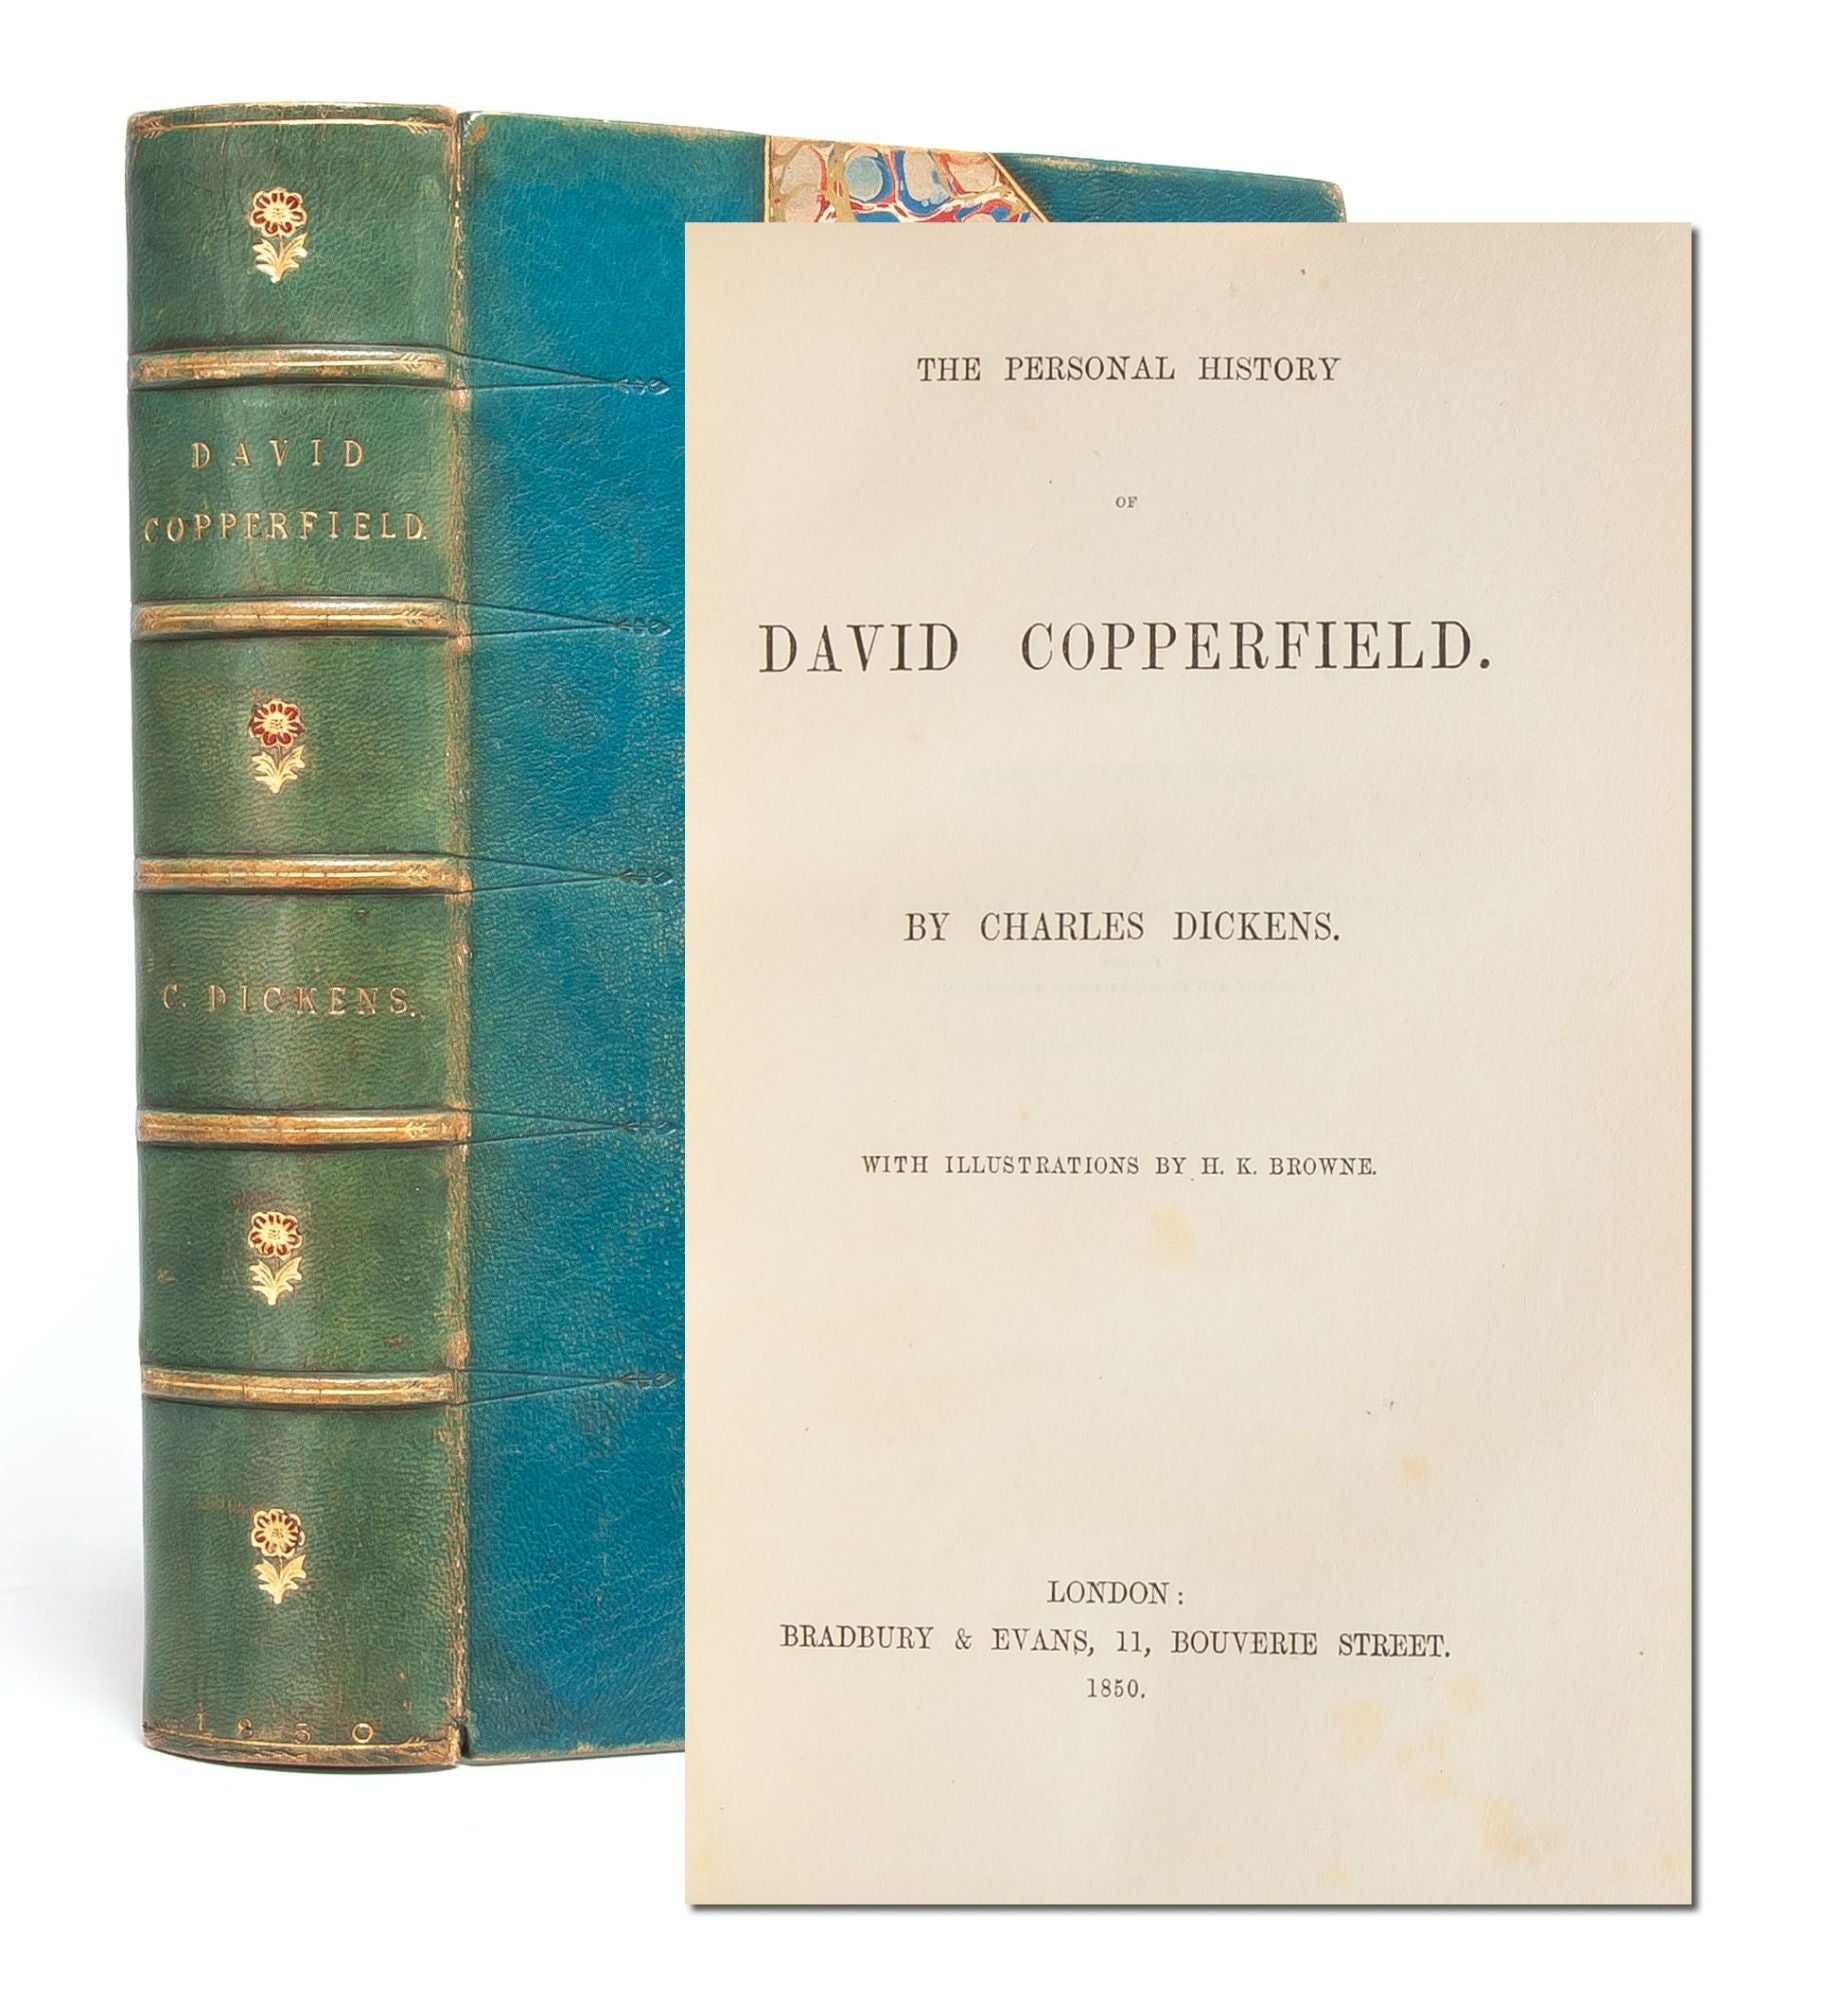 (Item #5575) The Personal History of David Copperfield. Charles Dickens.